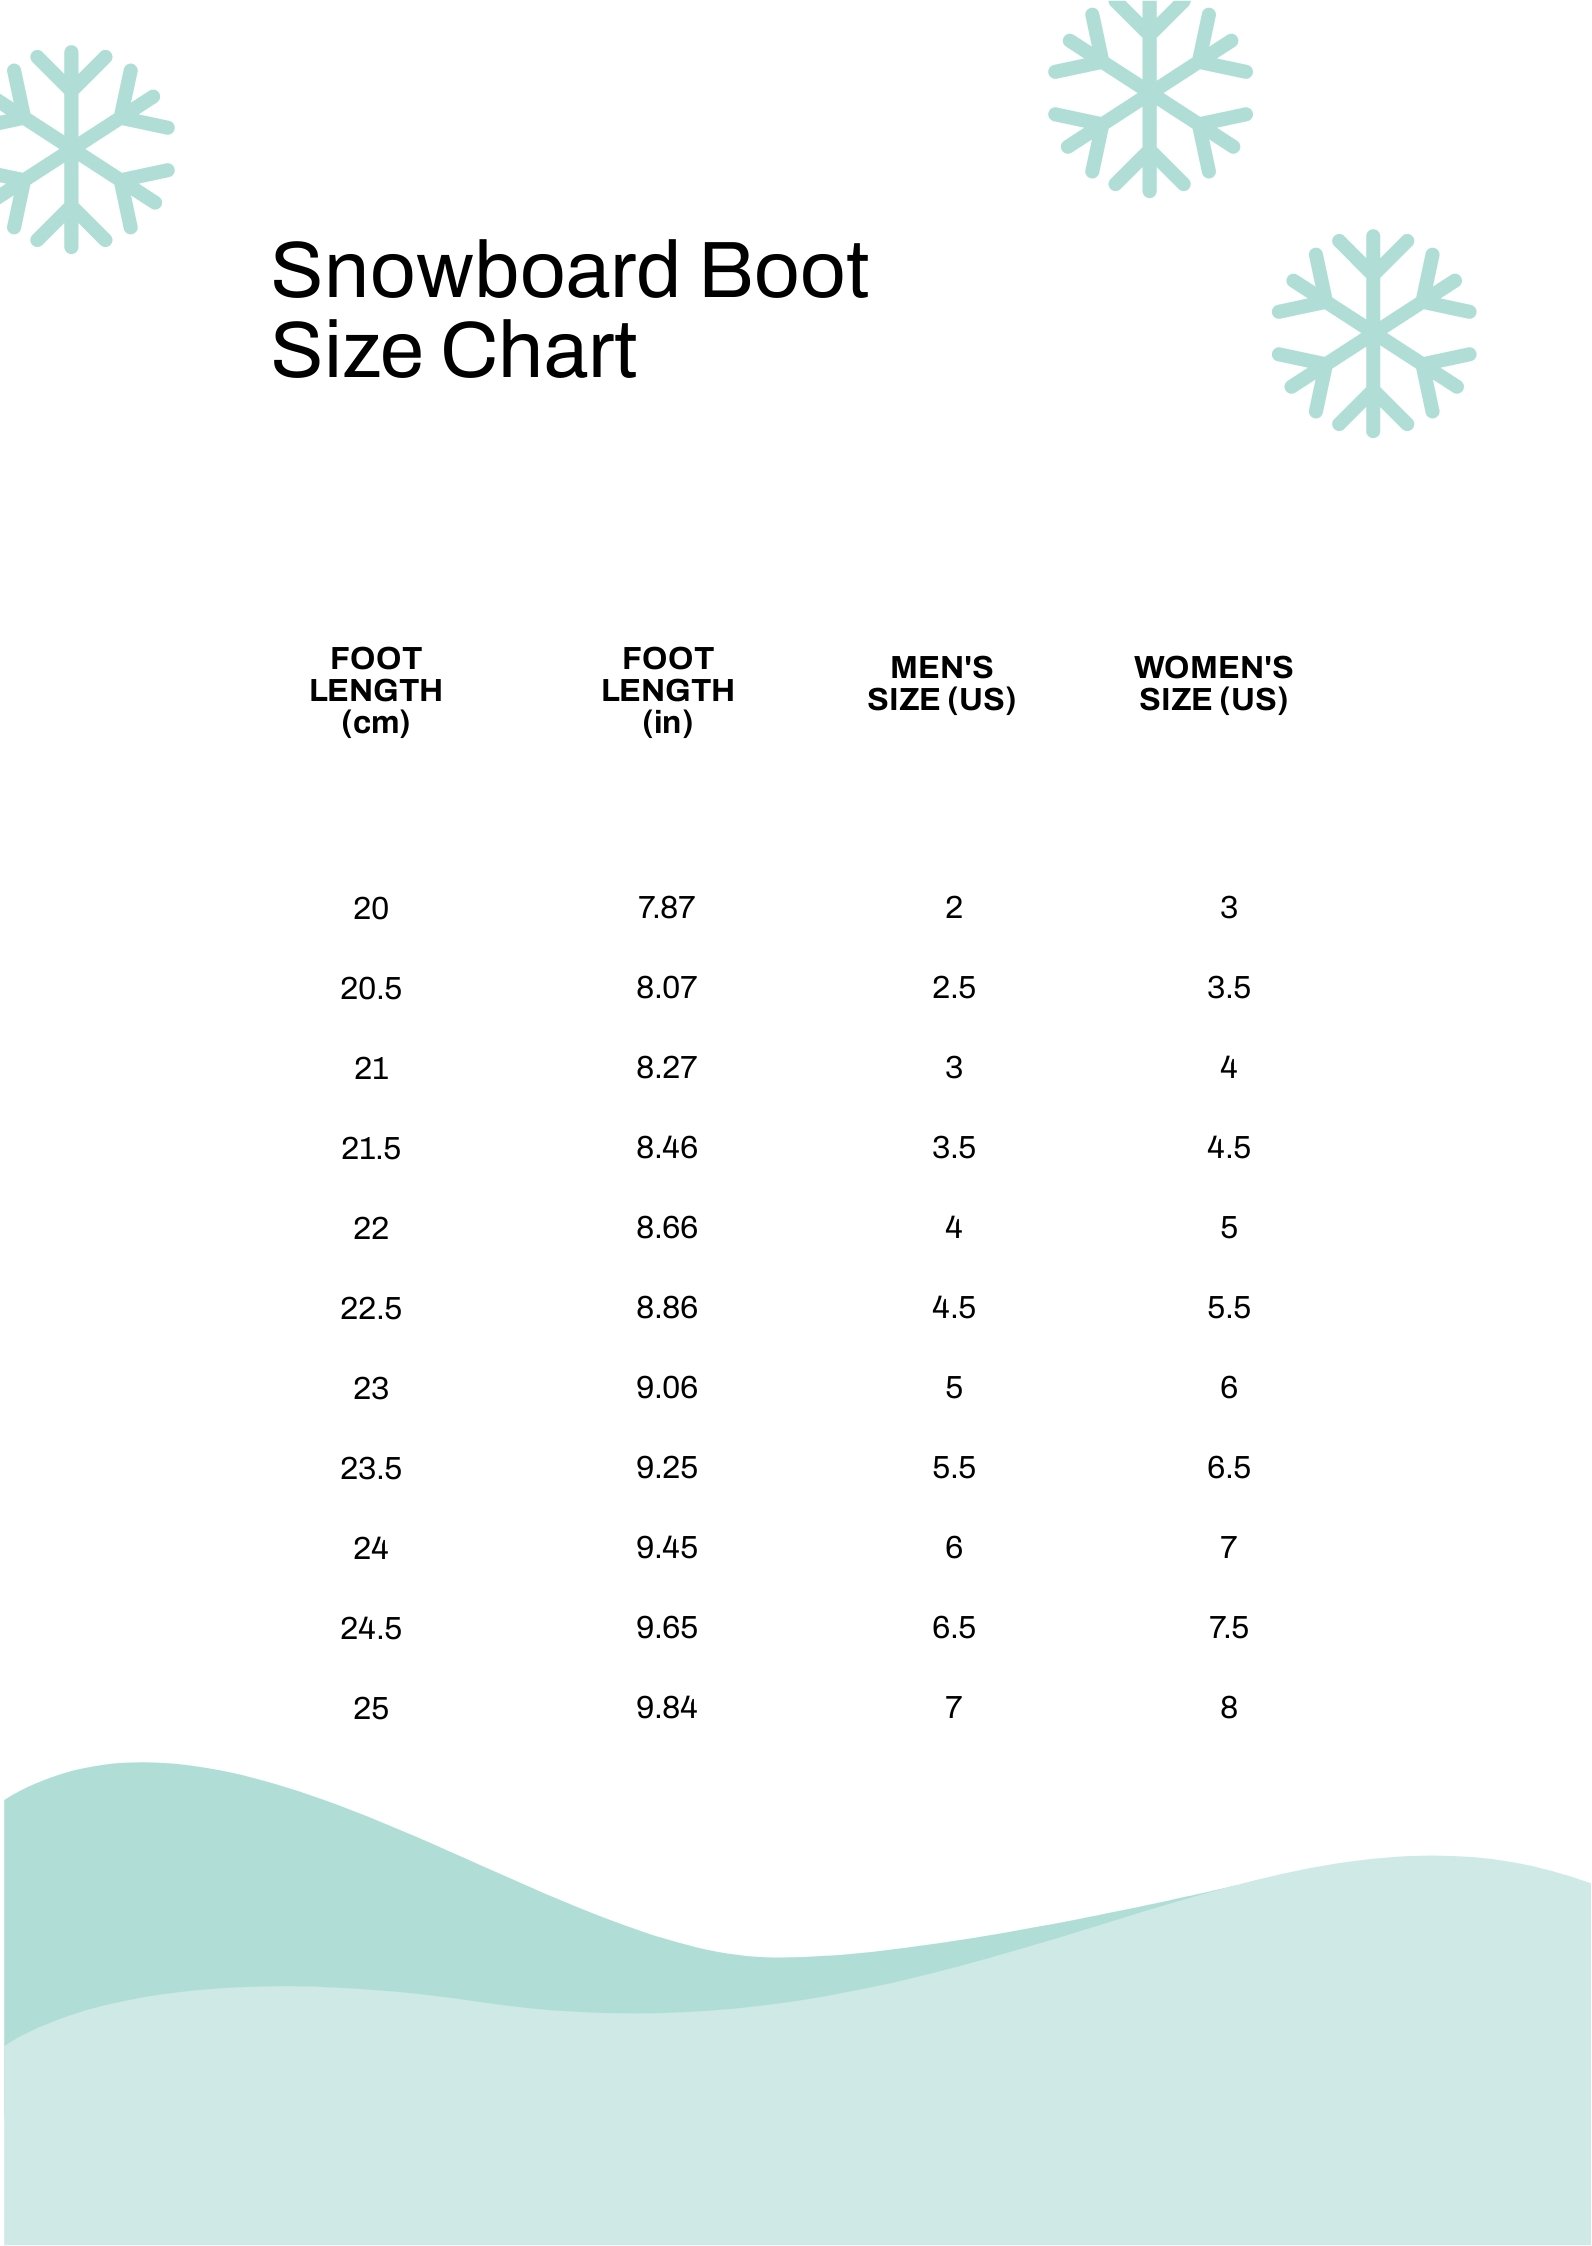 FREE Snowboard Size Chart Template Download in Word, Google Docs, PDF